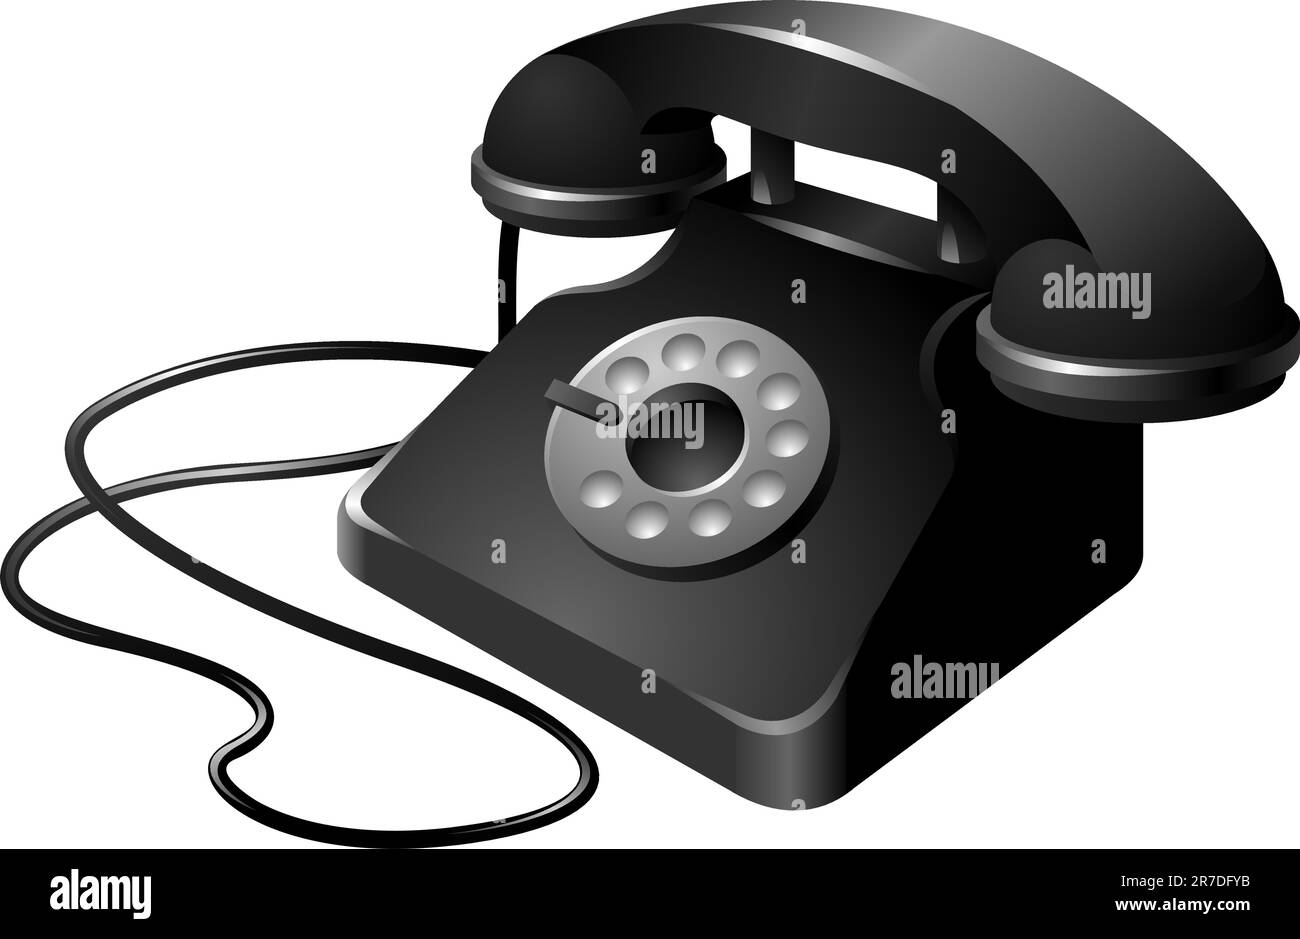 clean and simplistic vector illustration of a telephone set Stock Vector